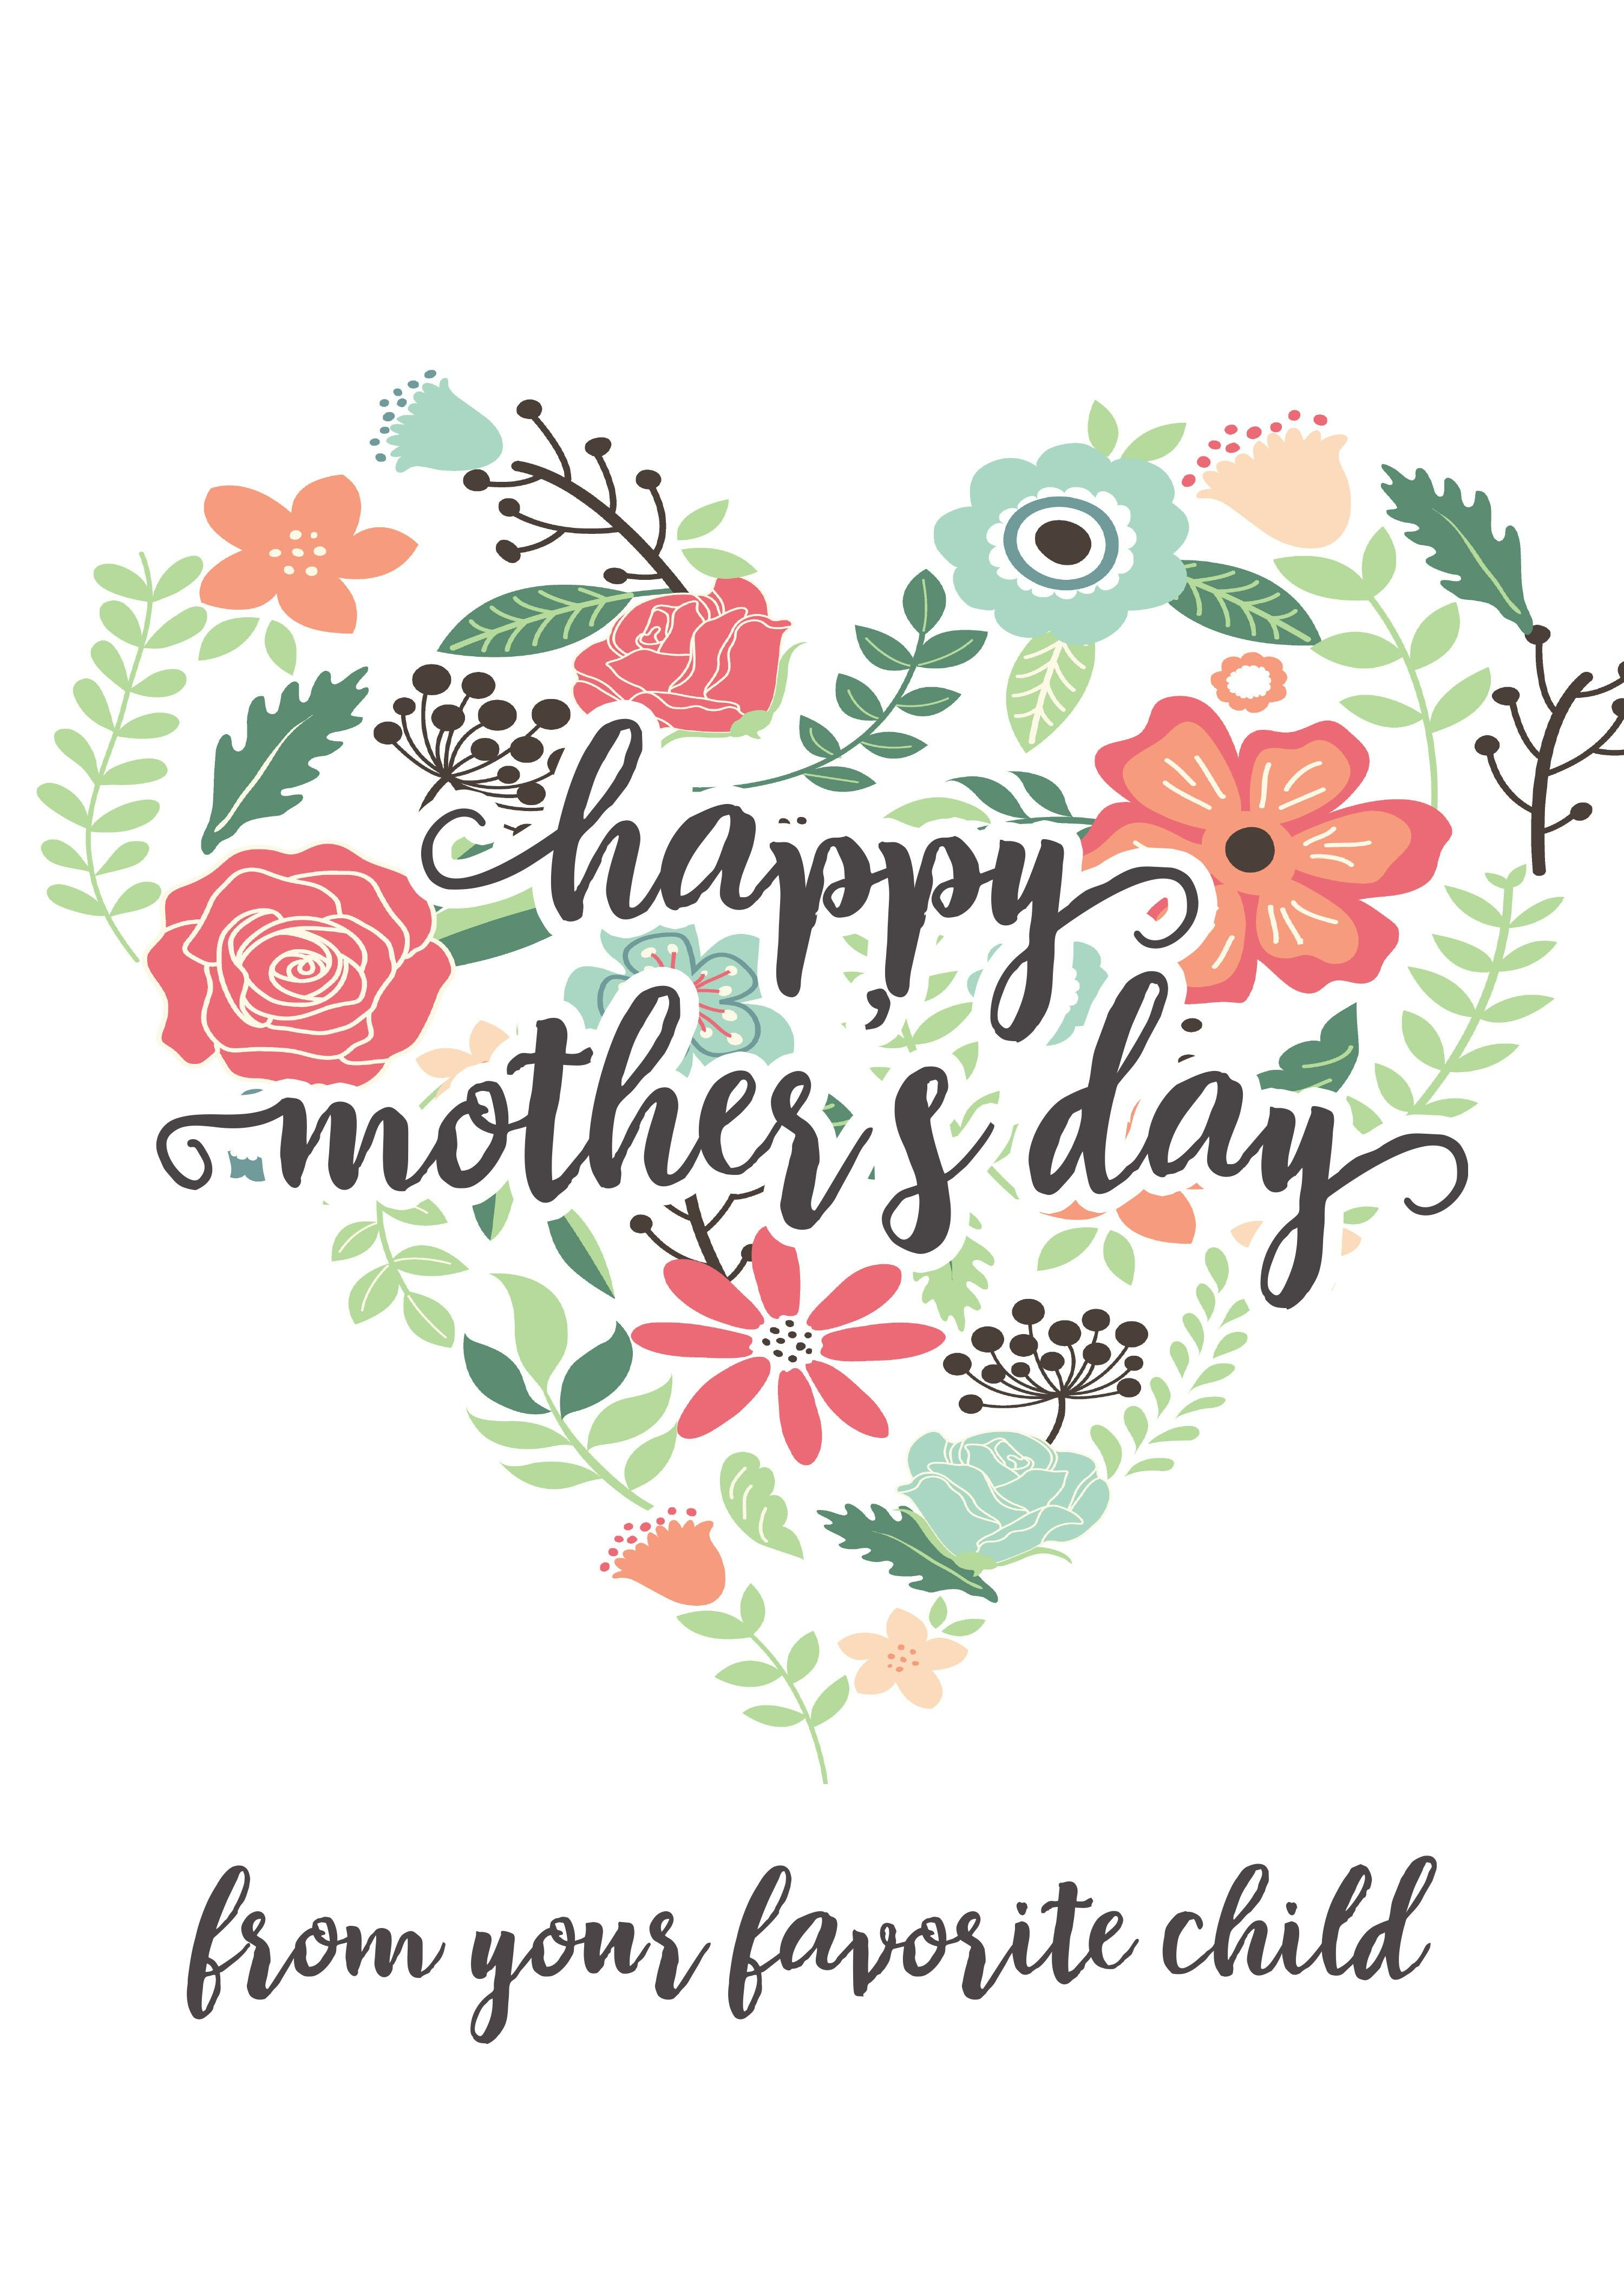 Happy Mothers Day Messages Free Printable Mothers Day Cards - Free Spanish Mothers Day Cards Printable